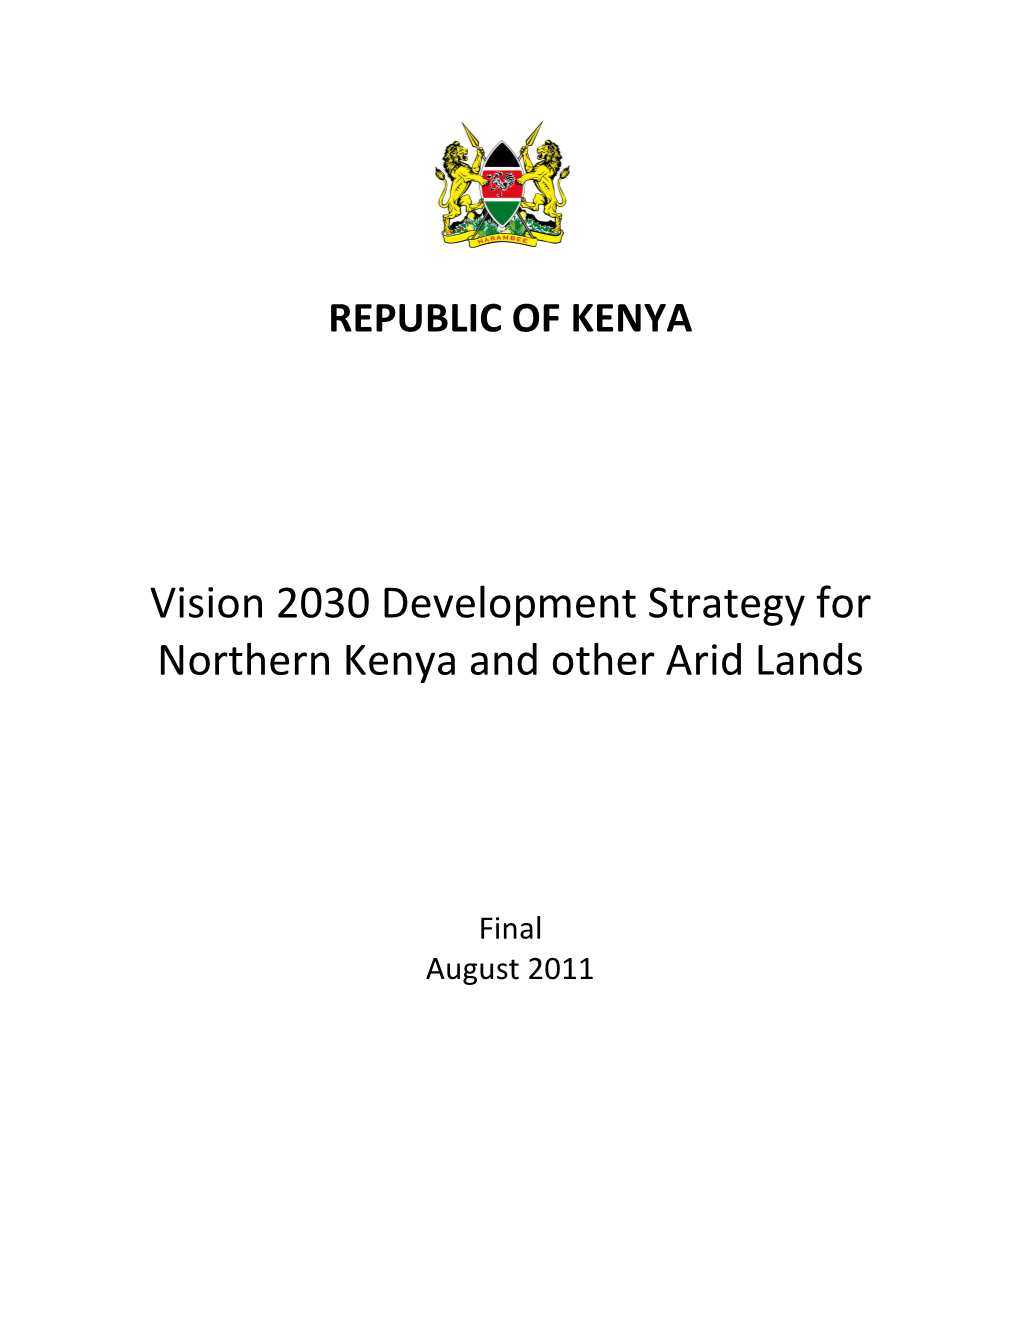 Vision 2030 Development Strategy for Northern Kenya and Other Arid Lands